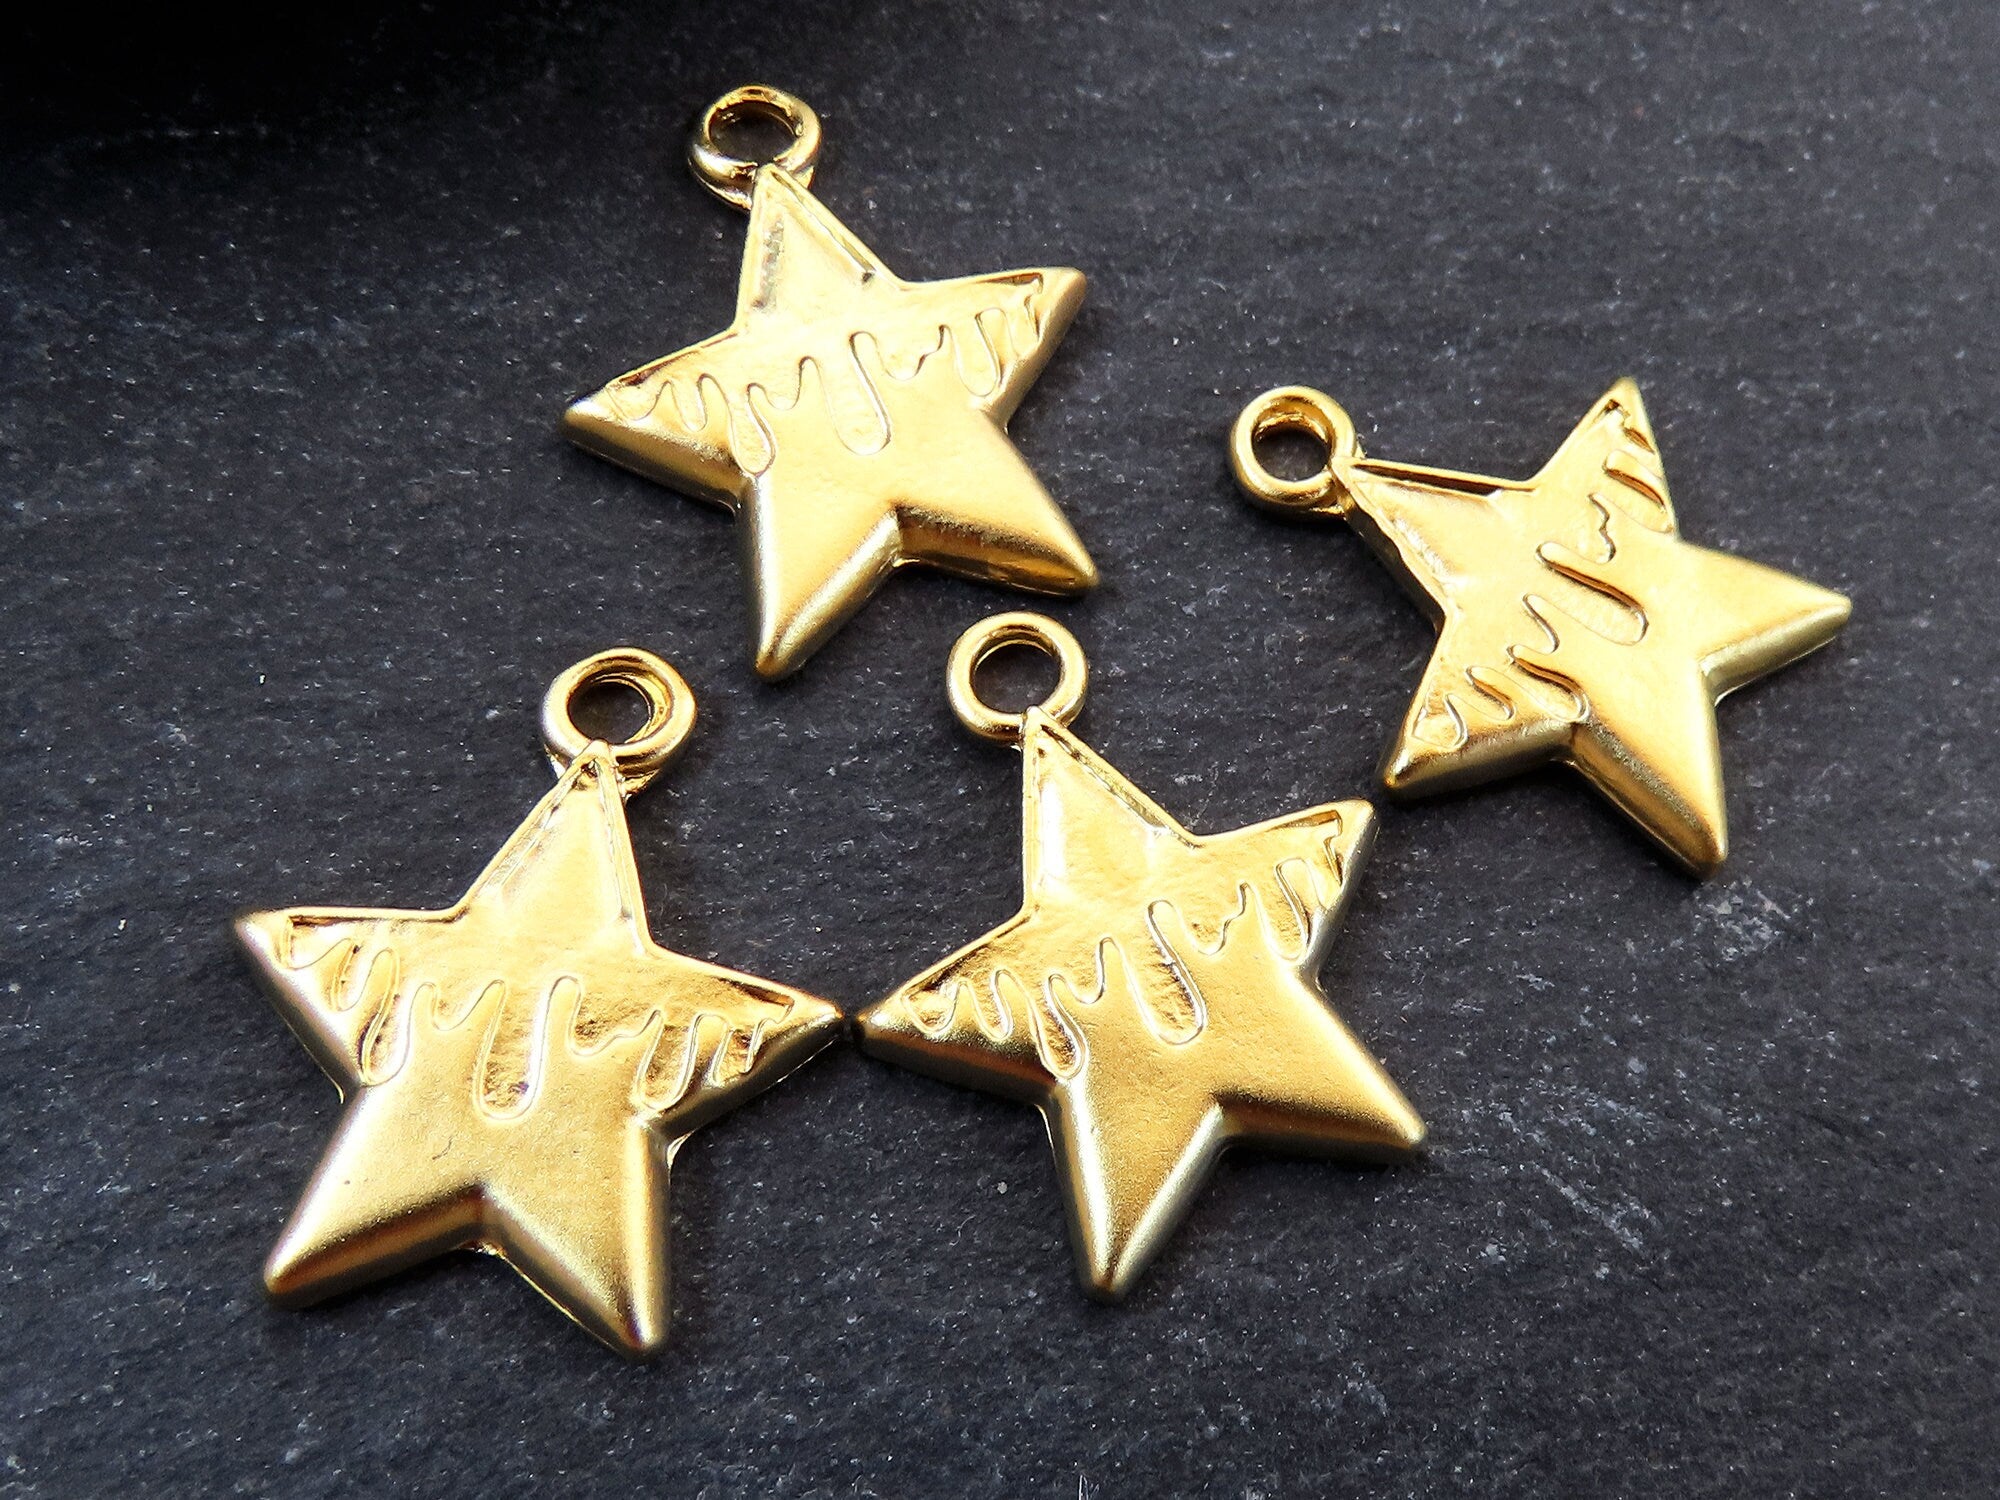 4 Star Pendant Charms, Dripping Star Pendants, Dangle Charms, Jewelry –  LylaSupplies